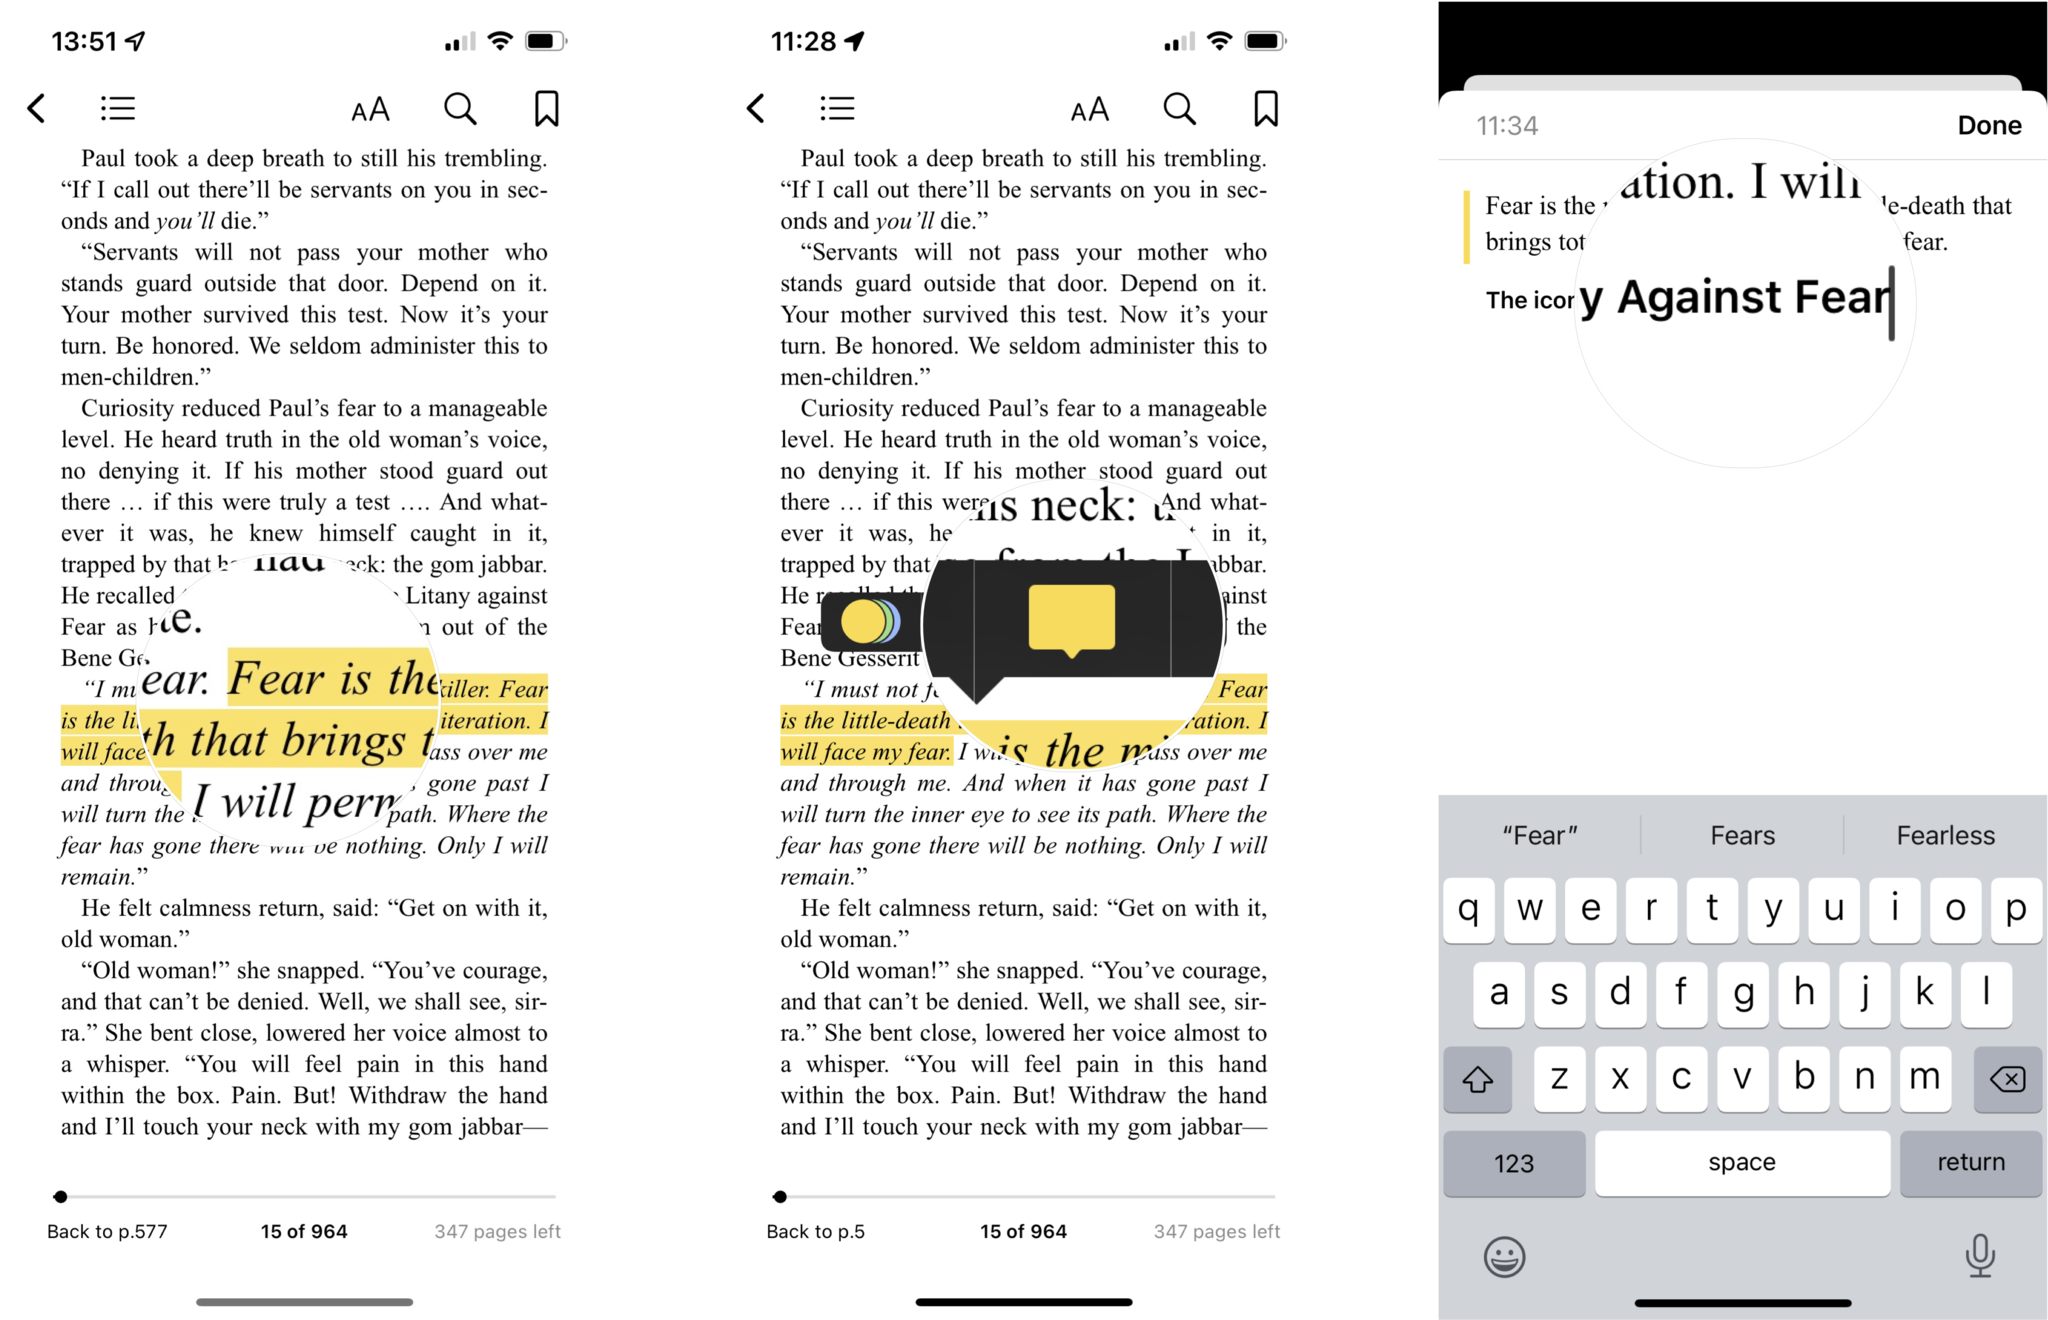 How to add a note to a highlight in Apple Books: Tap the highlighted text, tap the note button, enter your text and hit Done. 